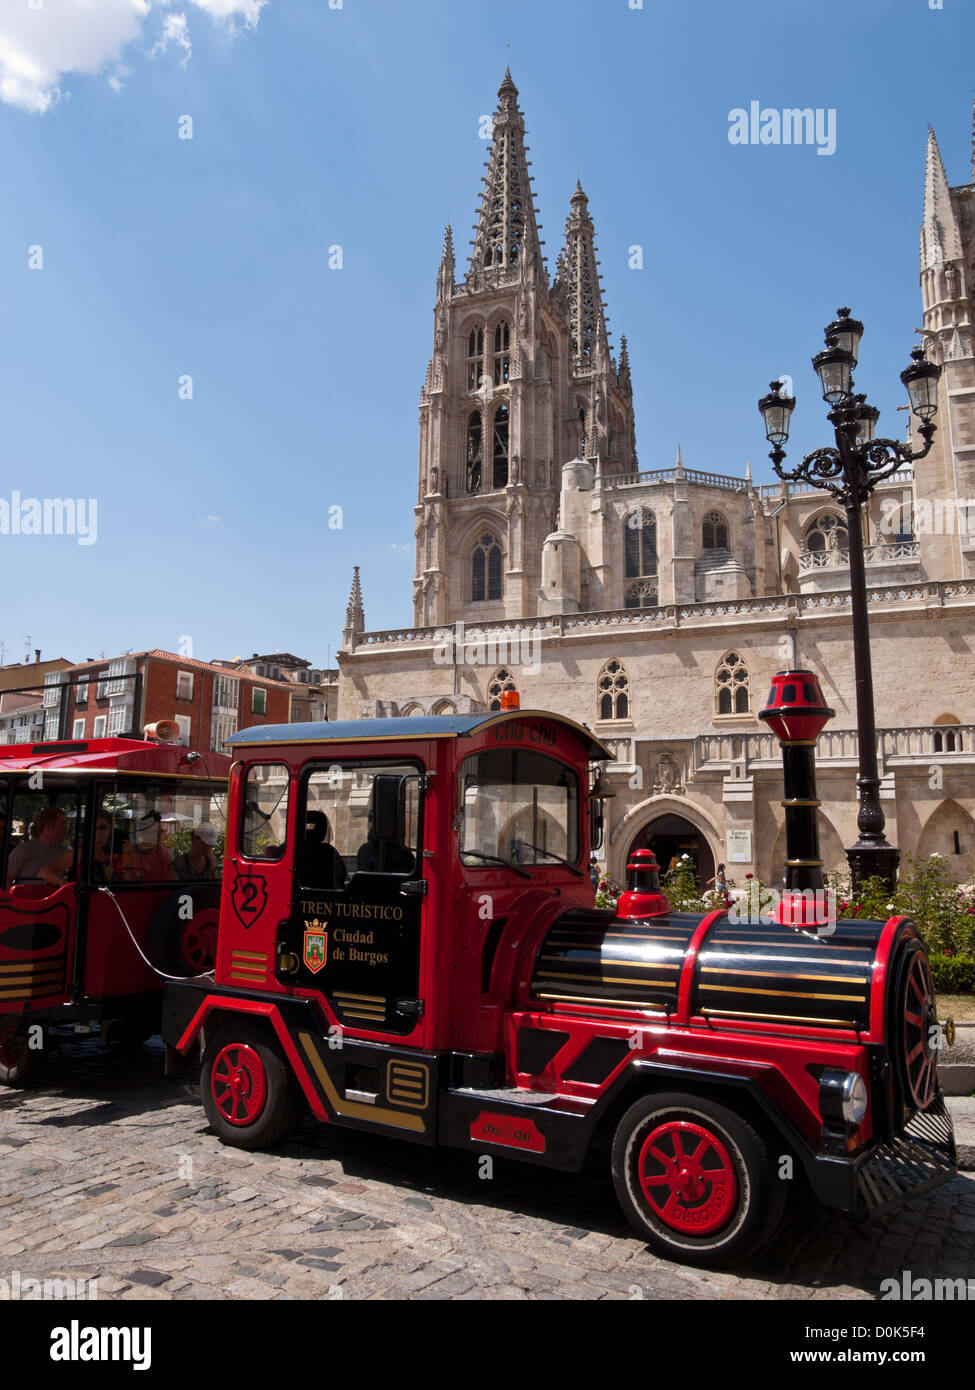 Touristic train near the Cathedral of Burgos, which is a Gothic-style Roman Catholic cathedral in Burgos, Spain Stock Photo